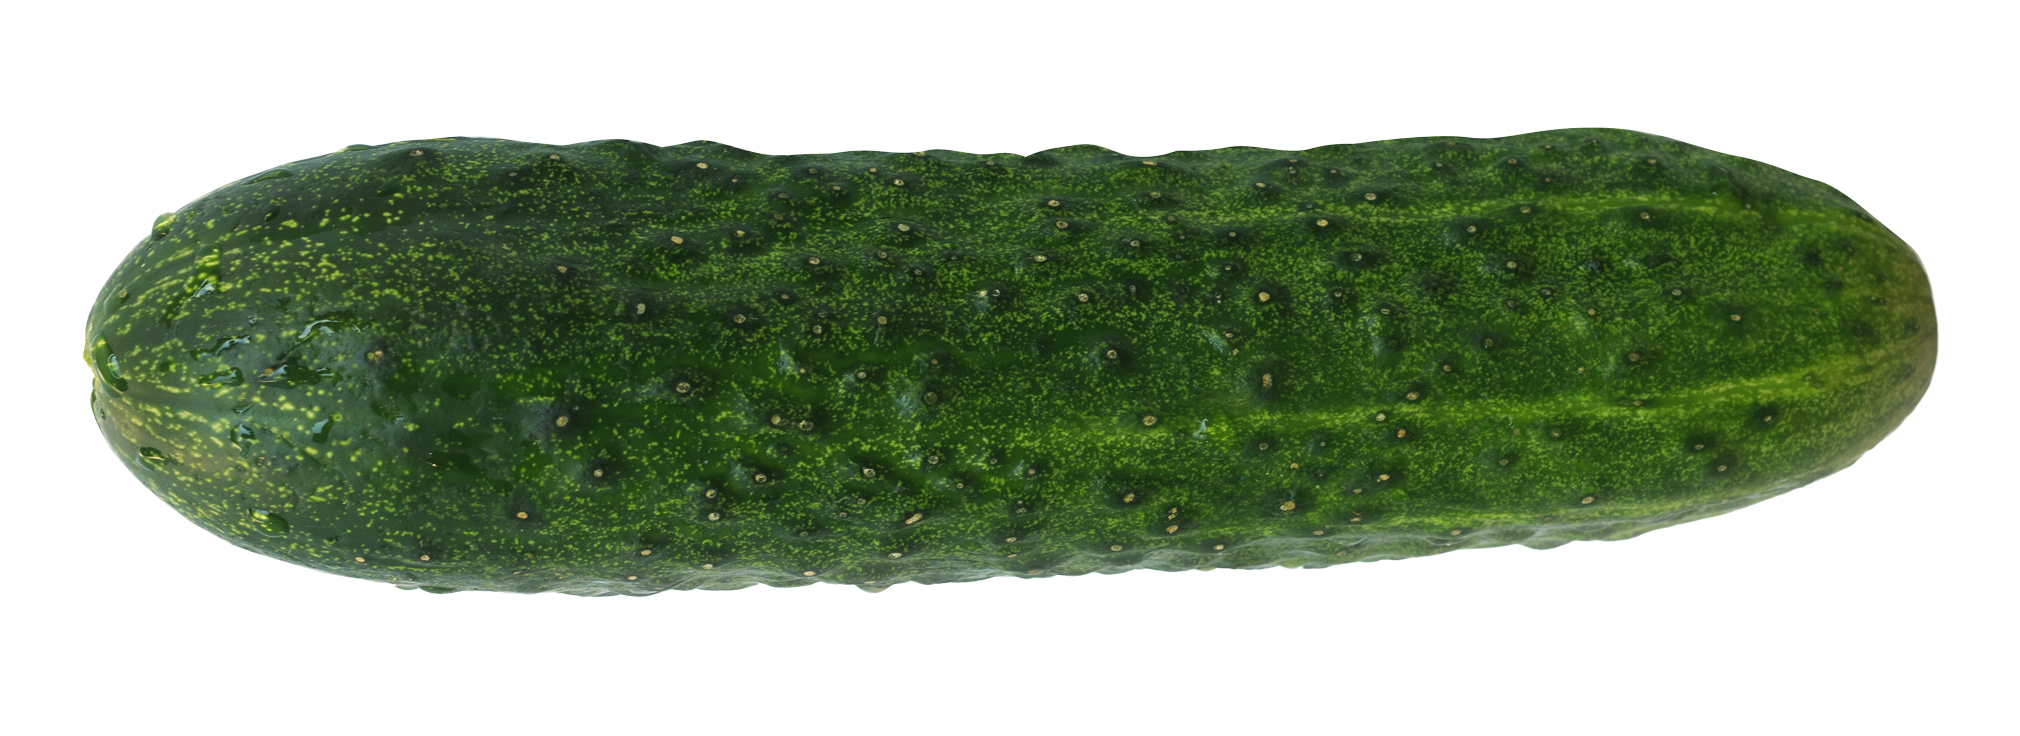 Single Cucumber PNG Background Image